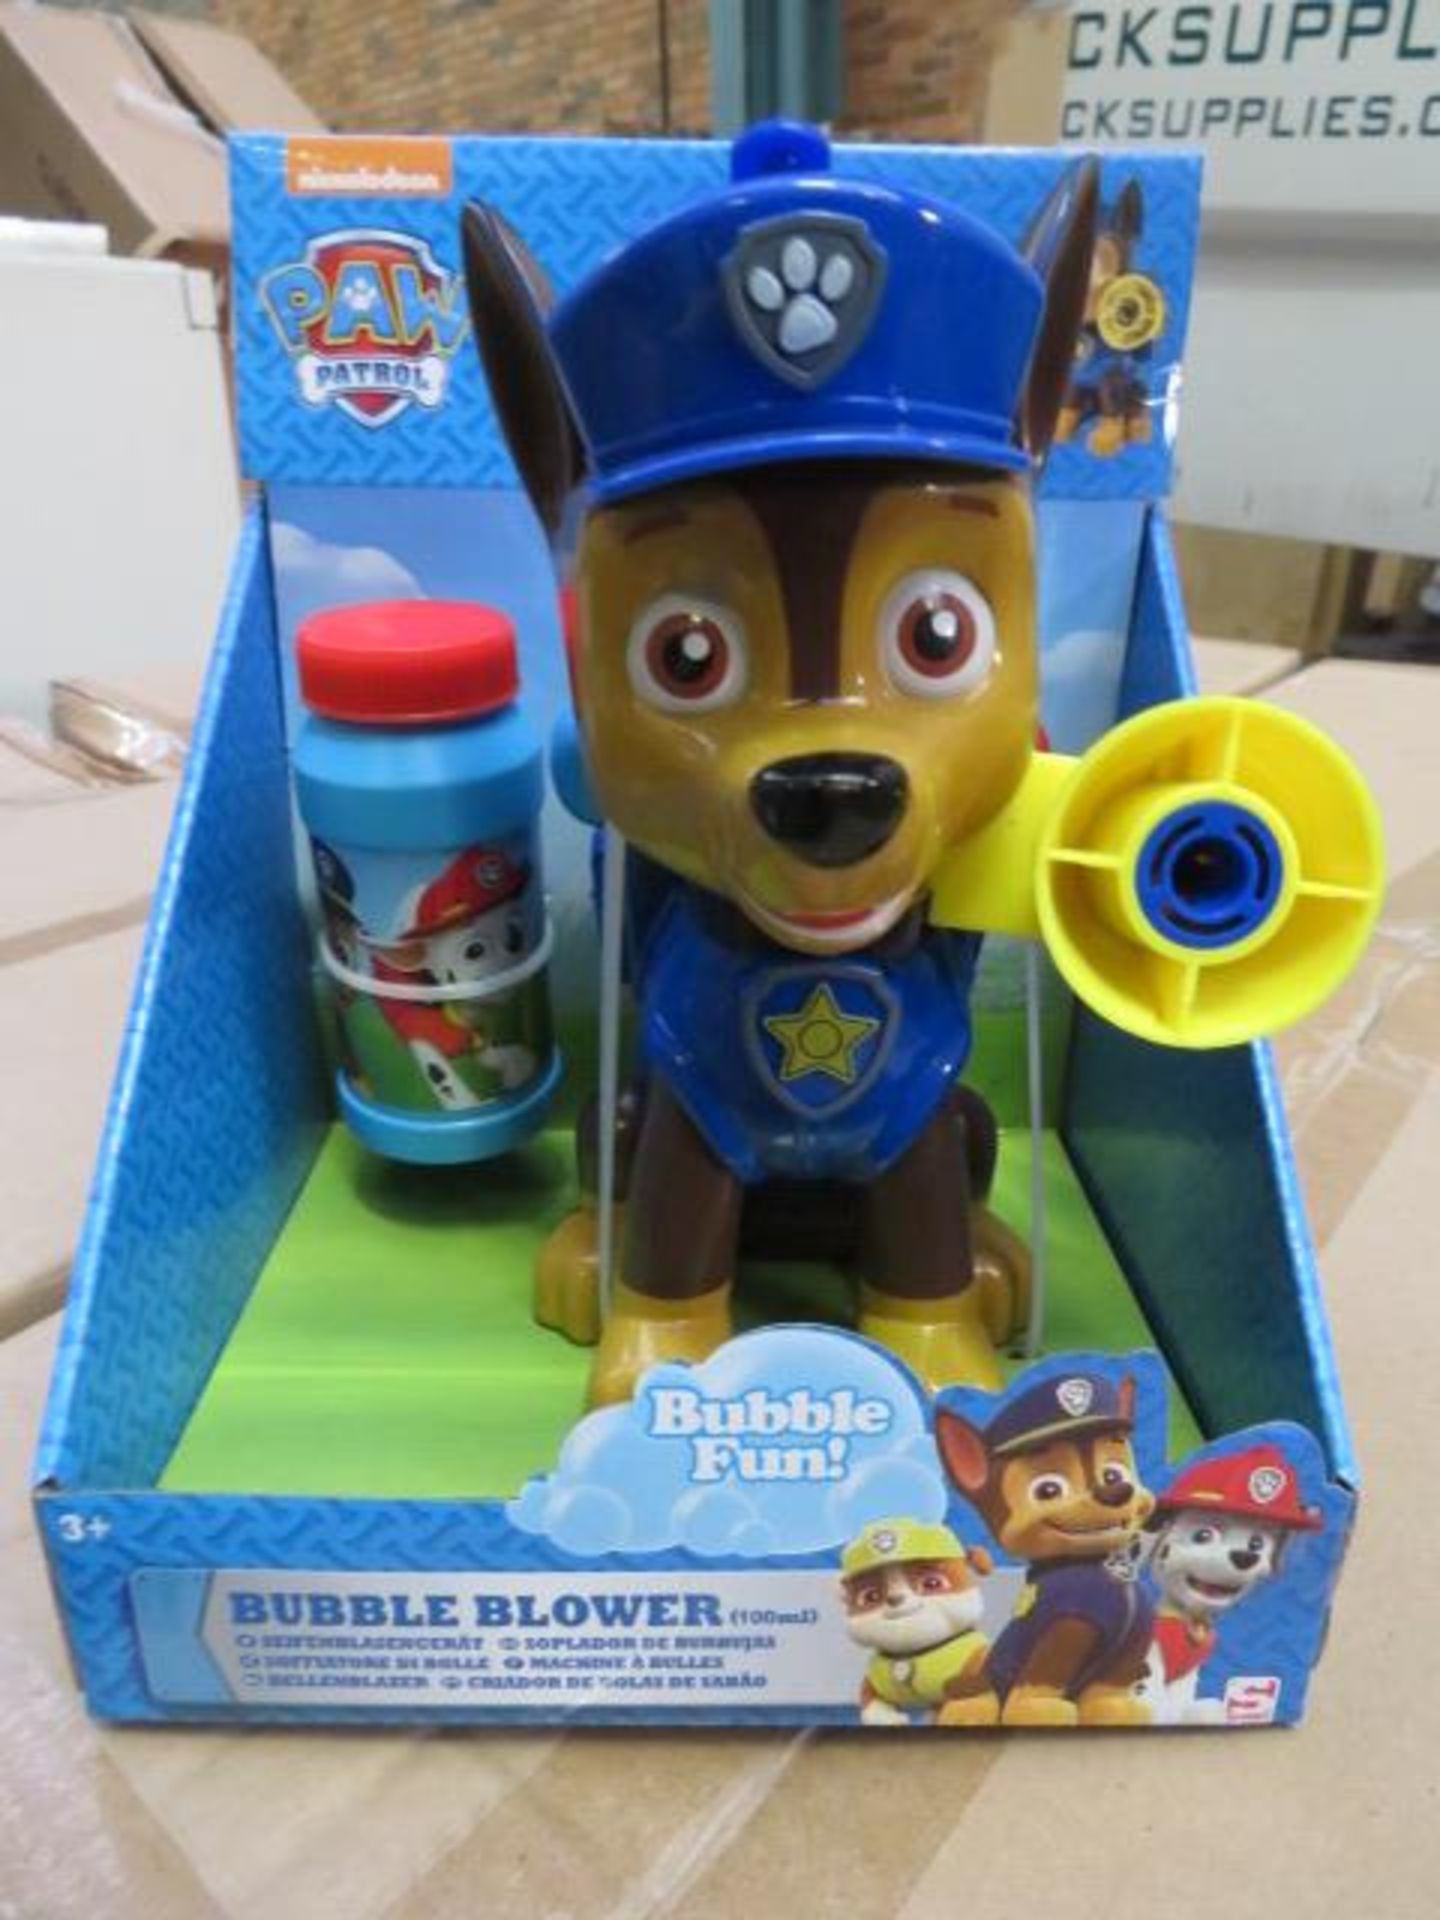 (17) PALLET TO CONTAIN 70 x BRAND NEW PAW PATROL BUBBLE BLOWERS. RRP £19.99 EACH. HUGE RE-SALE...